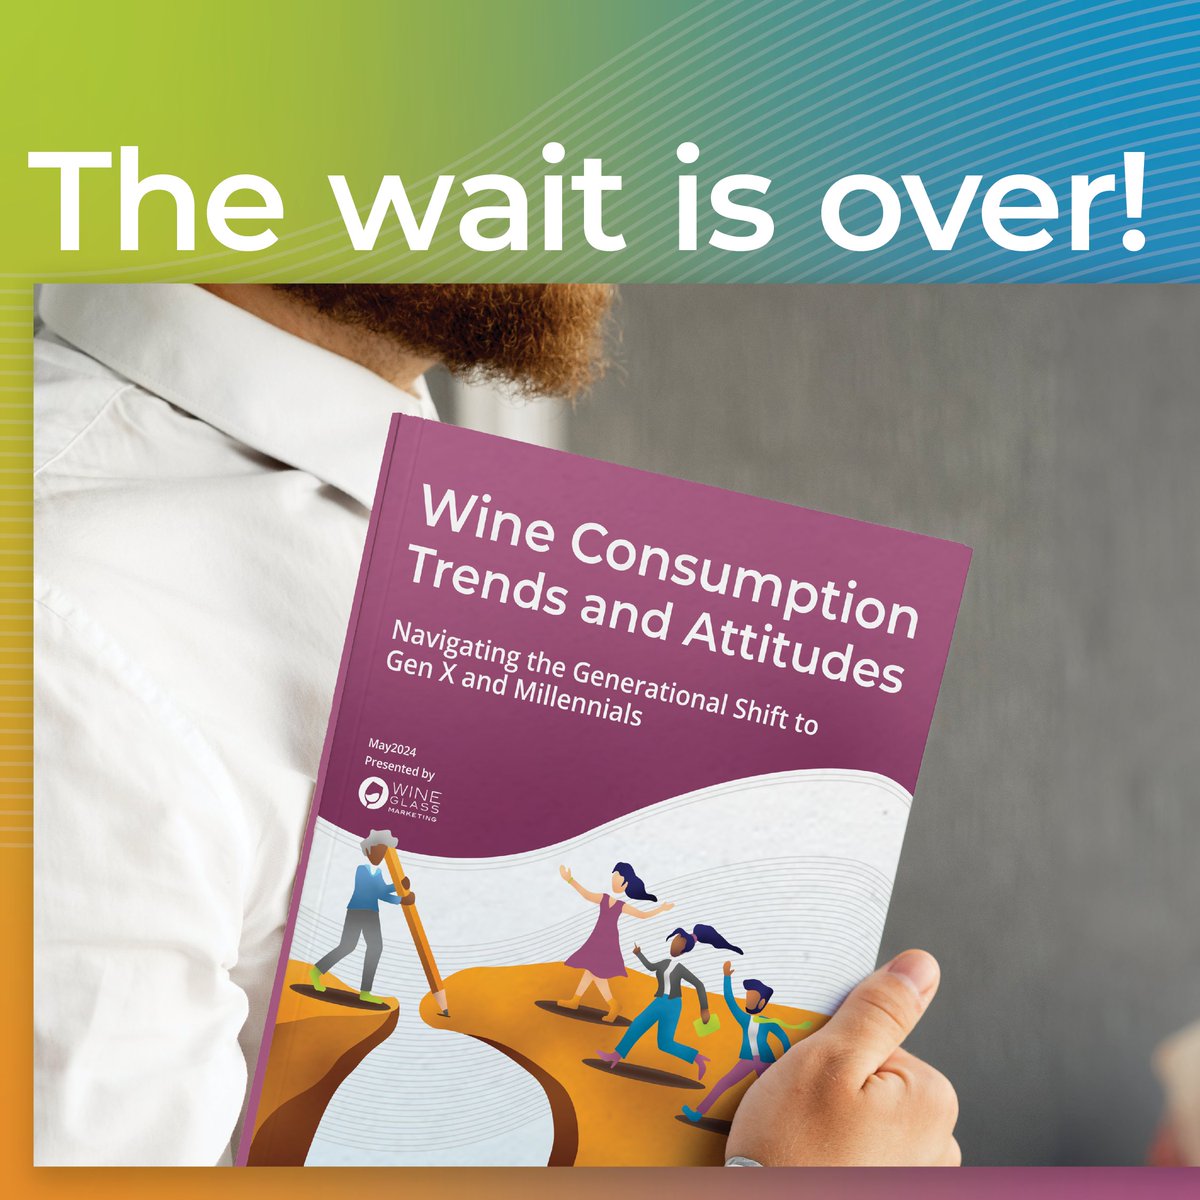 Exciting news! Our long-awaited research findings are now available in a comprehensive whitepaper. We invested our resources to conduct a thorough study, surveying nearly 2,000 Gen X and Millennial wine enthusiasts. Dive into the insights now. bit.ly/3IPHEgY